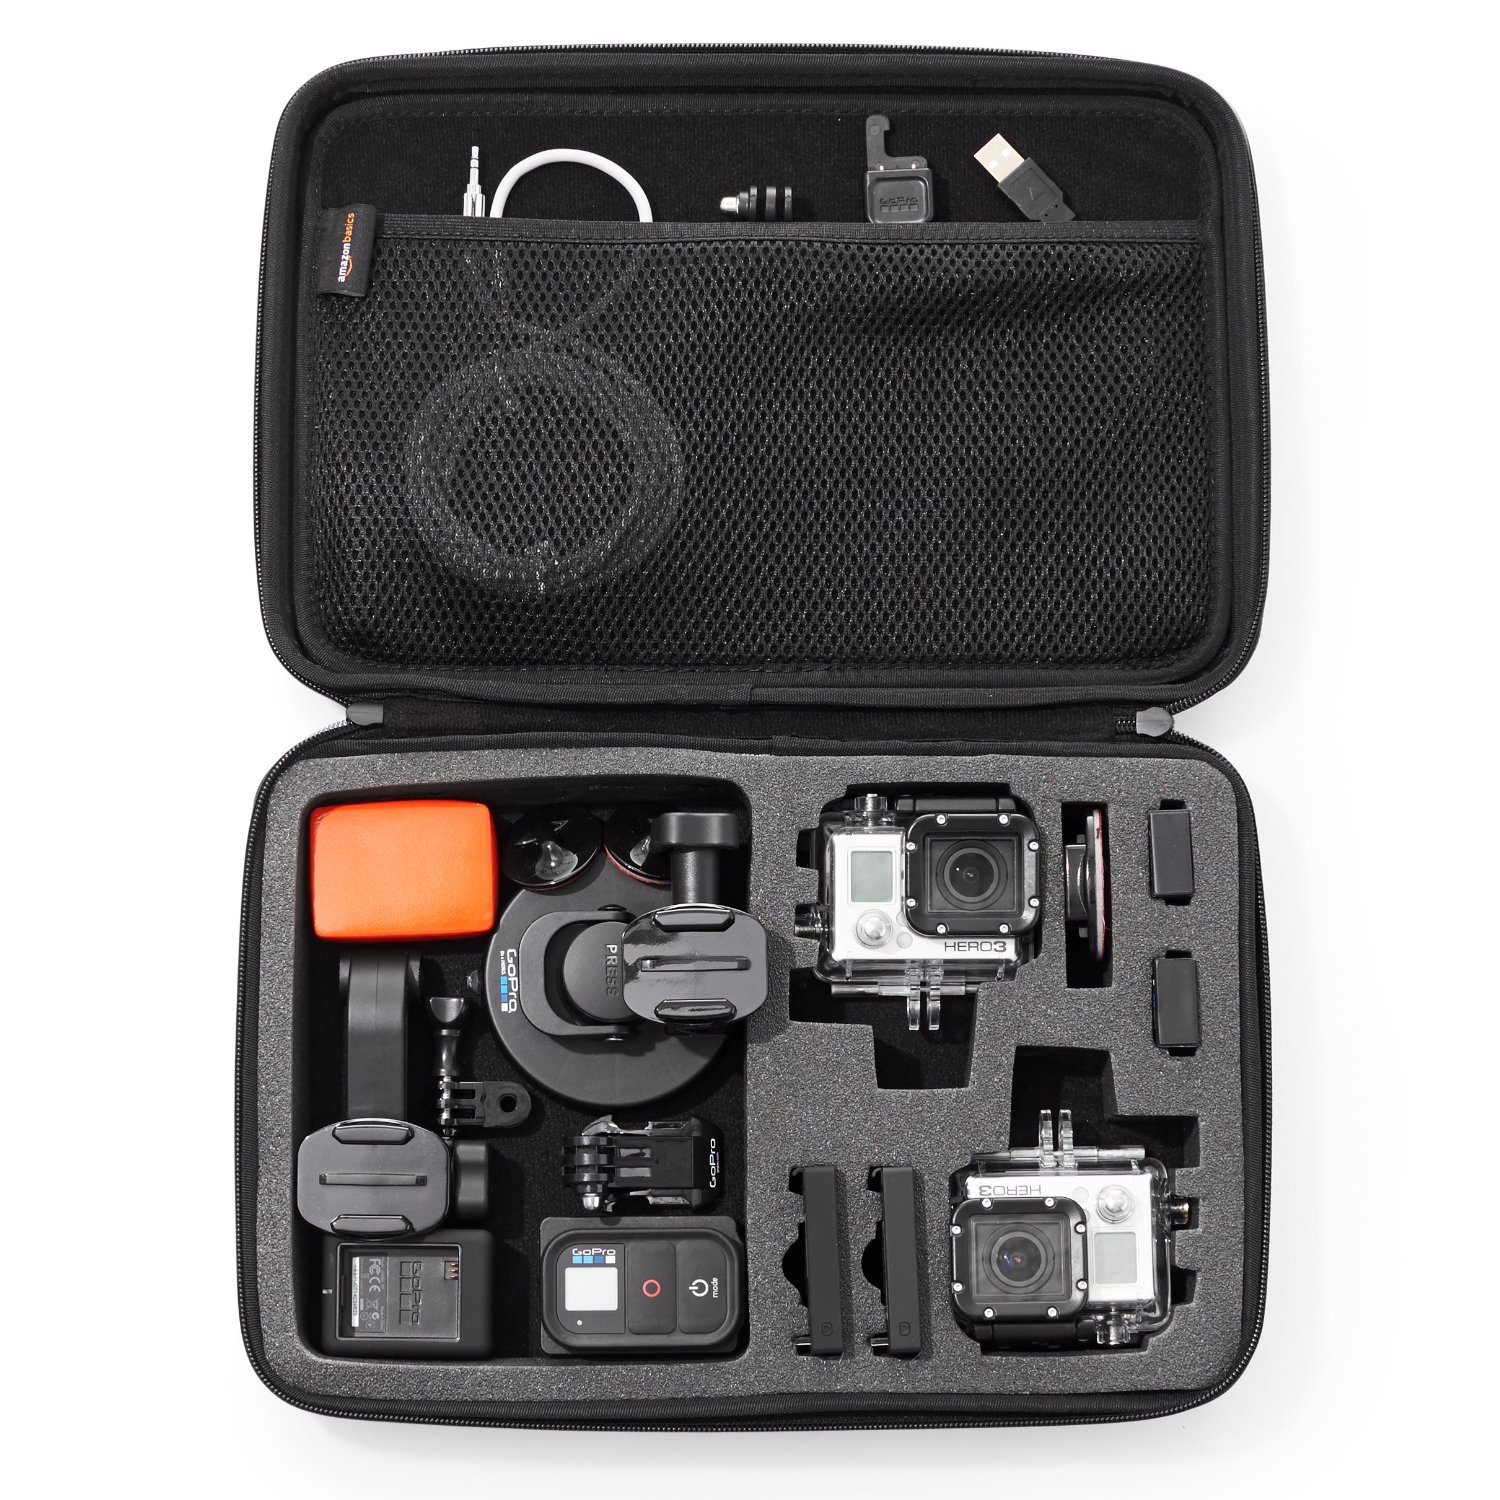 AmazonBasics Carrying Case for GoPro Review - OCRAddict